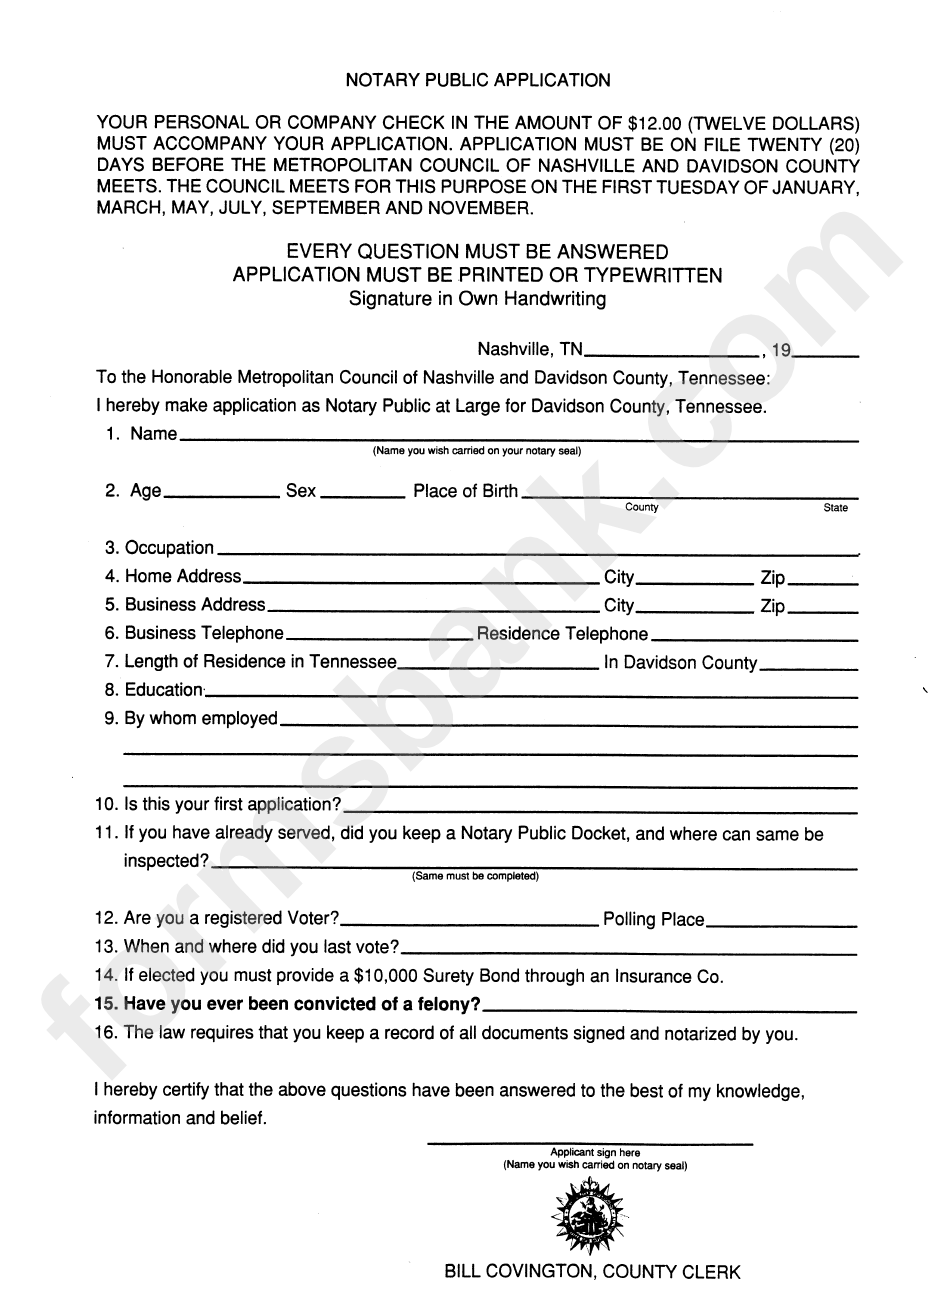 Notary Public Application Form